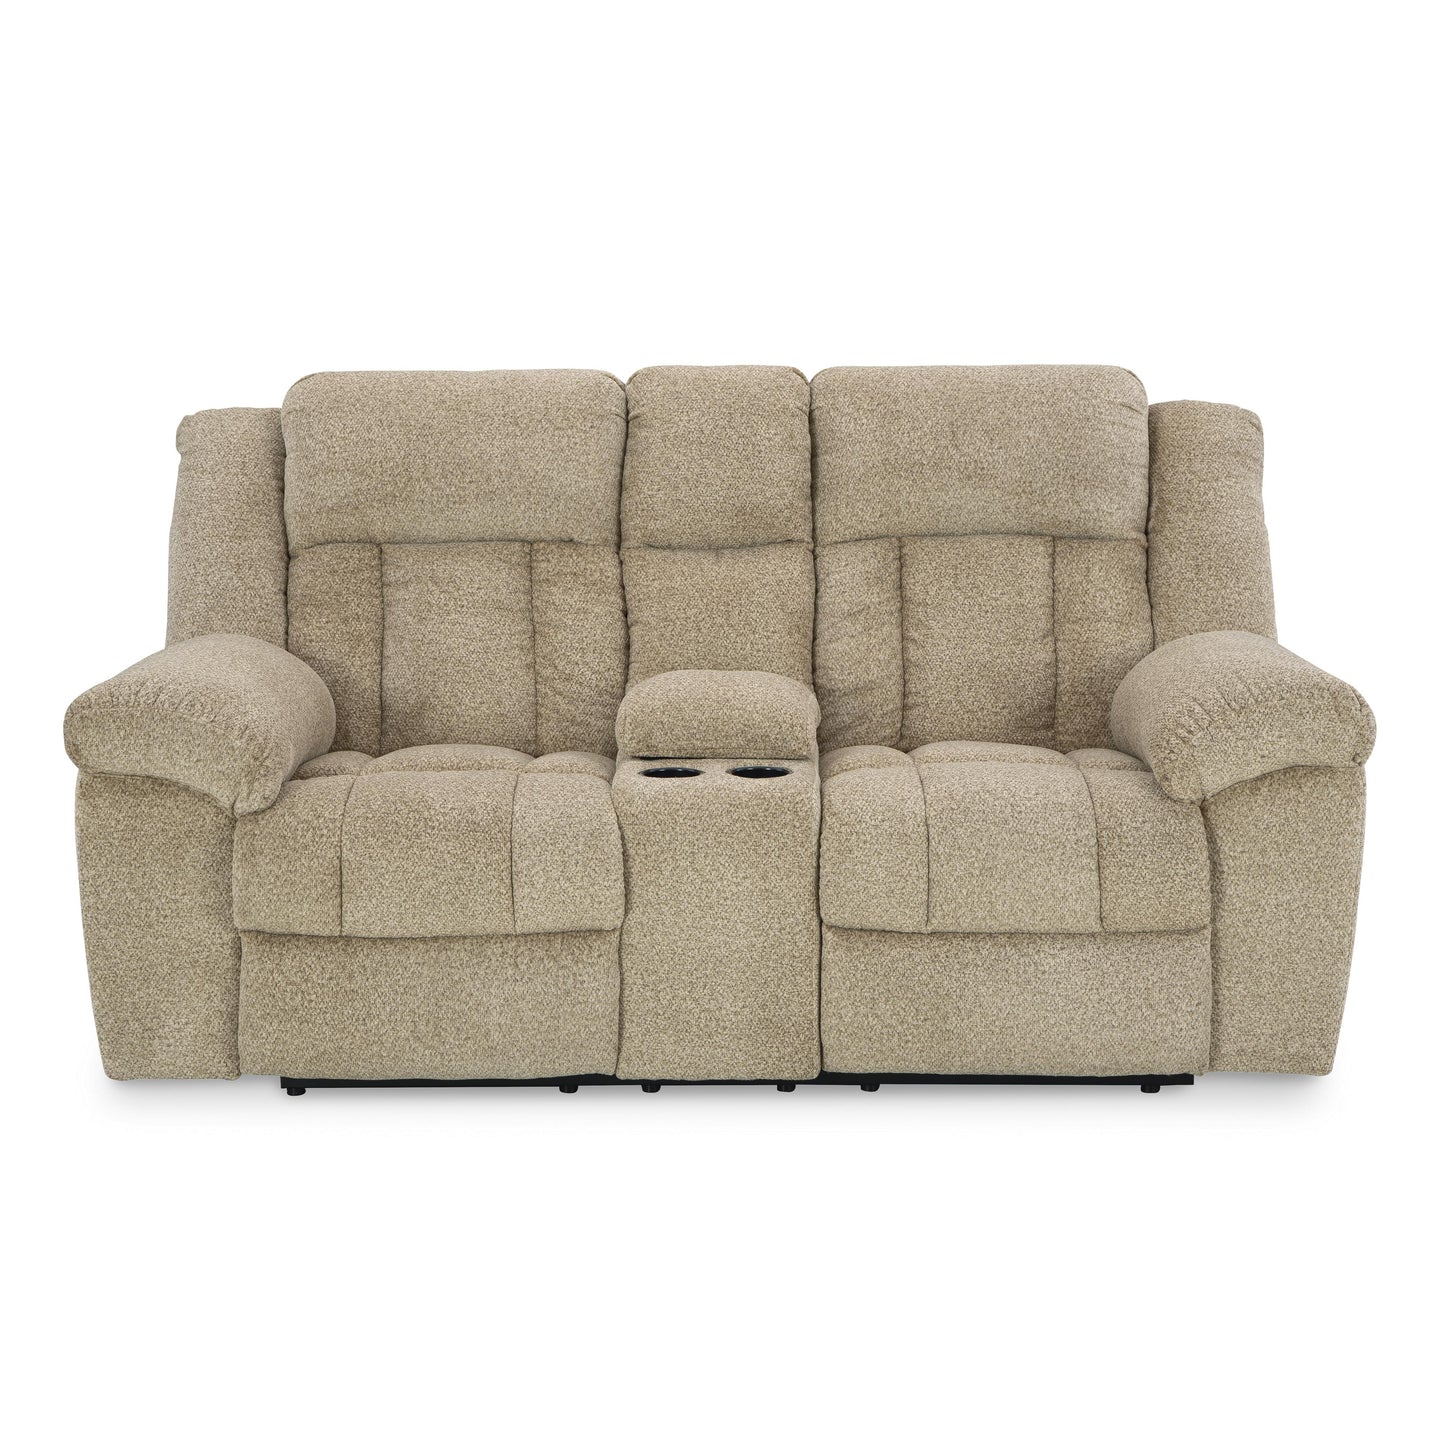 Signature Design by Ashley Tip-Off Power Reclining Loveseat 6930518 IMAGE 4